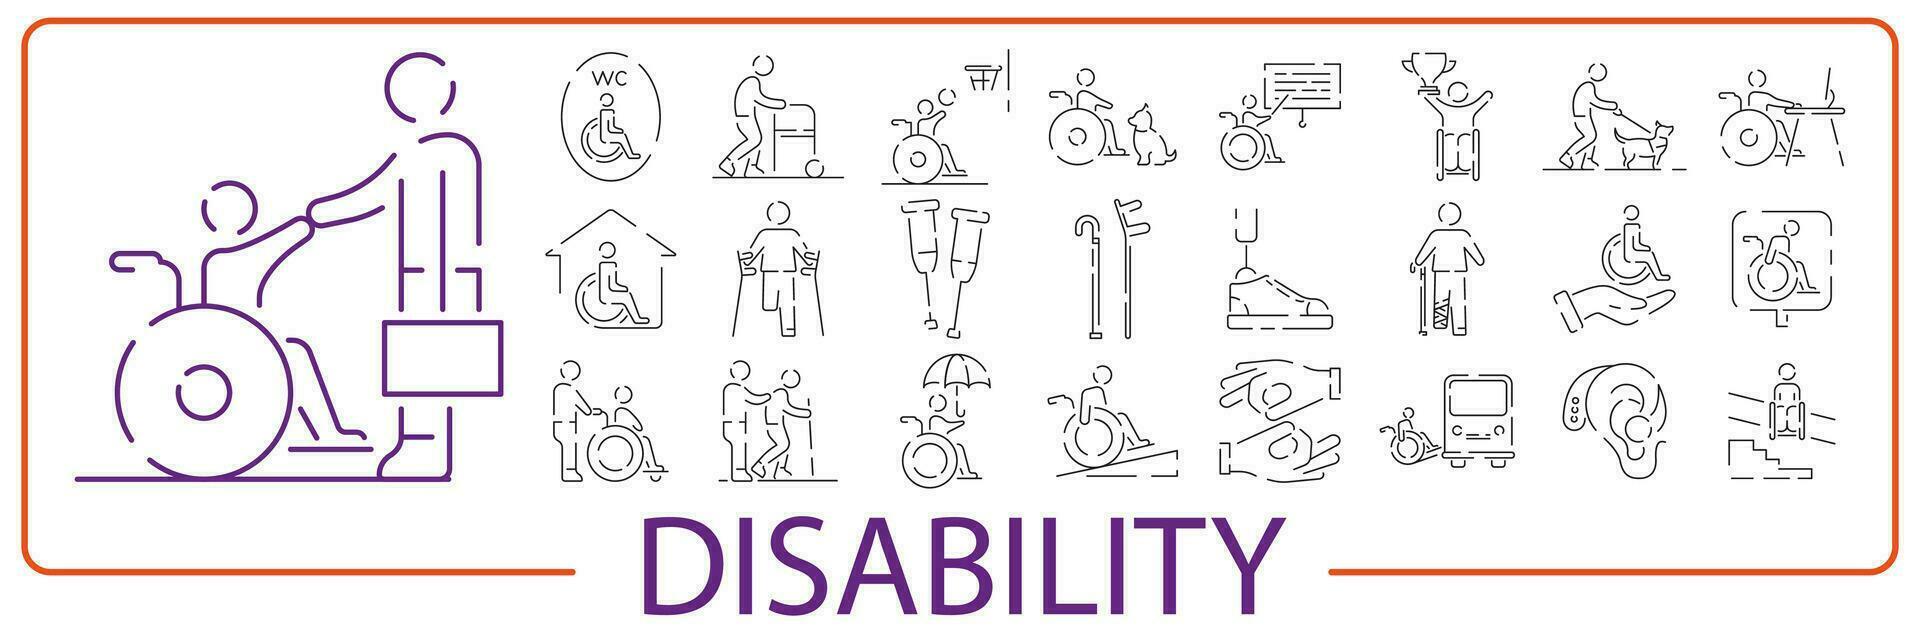 disabled people Icons Set. Linear or line style Icons. Vector illustration social issue.